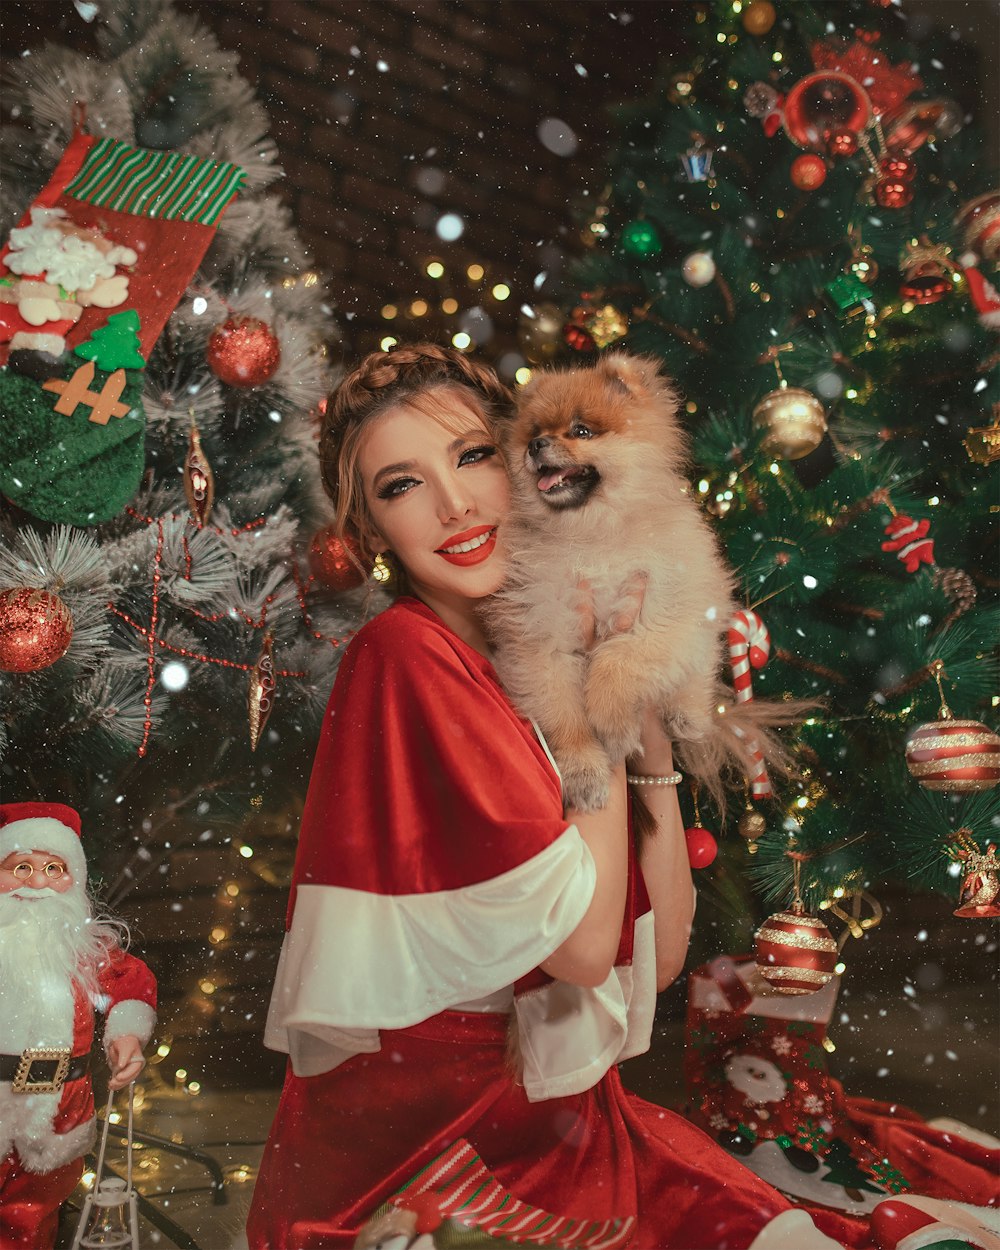 woman smiling and holding dog beside Christmas decors